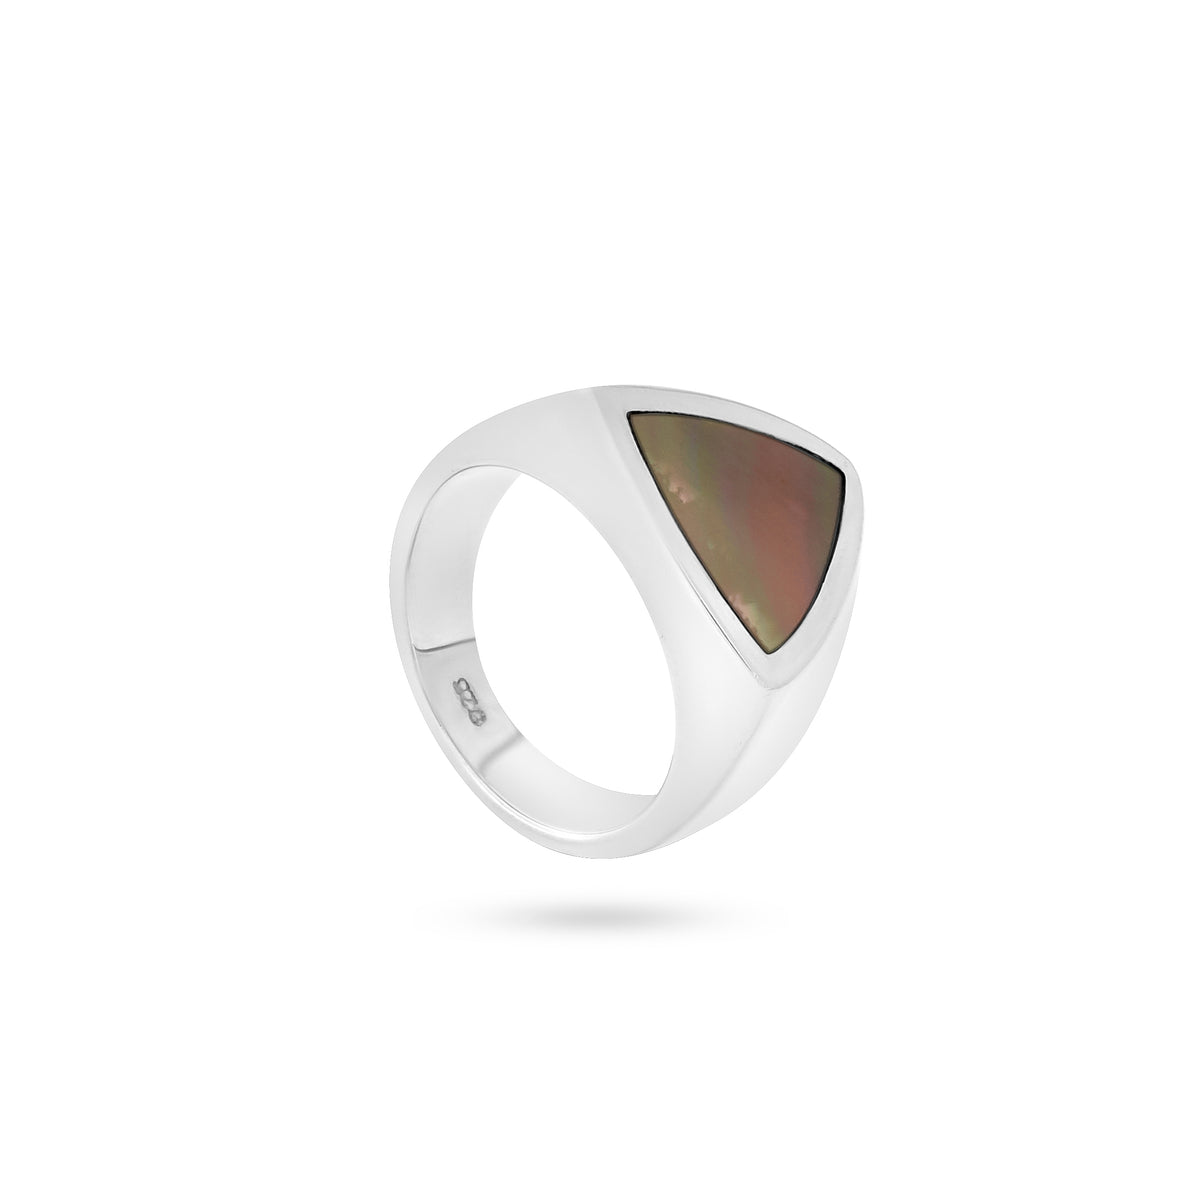 VIKA jewels unisex signet ring with genuine shell recycled sterling silver nude color shell handmade bali triangle